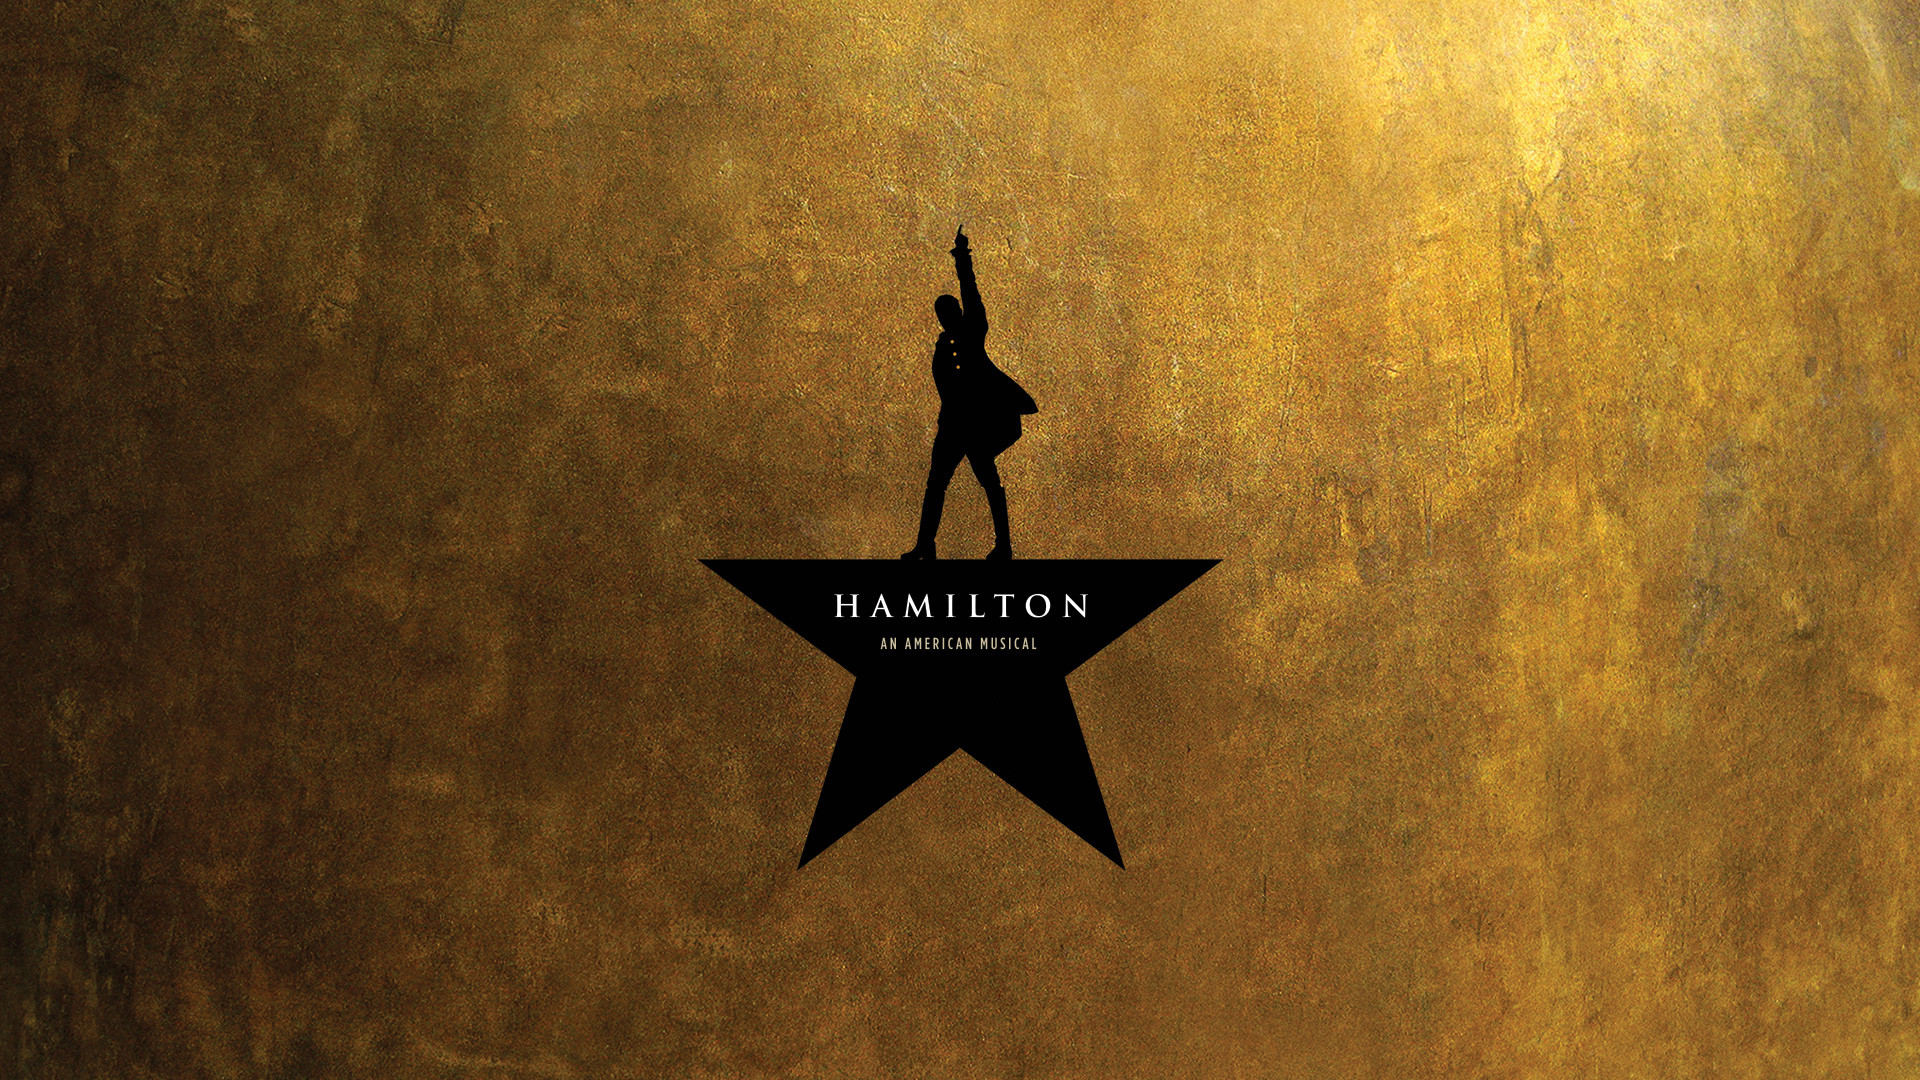 Love Hamilton Join the revolution Download our wallpaper for your phones, tablets, and computers